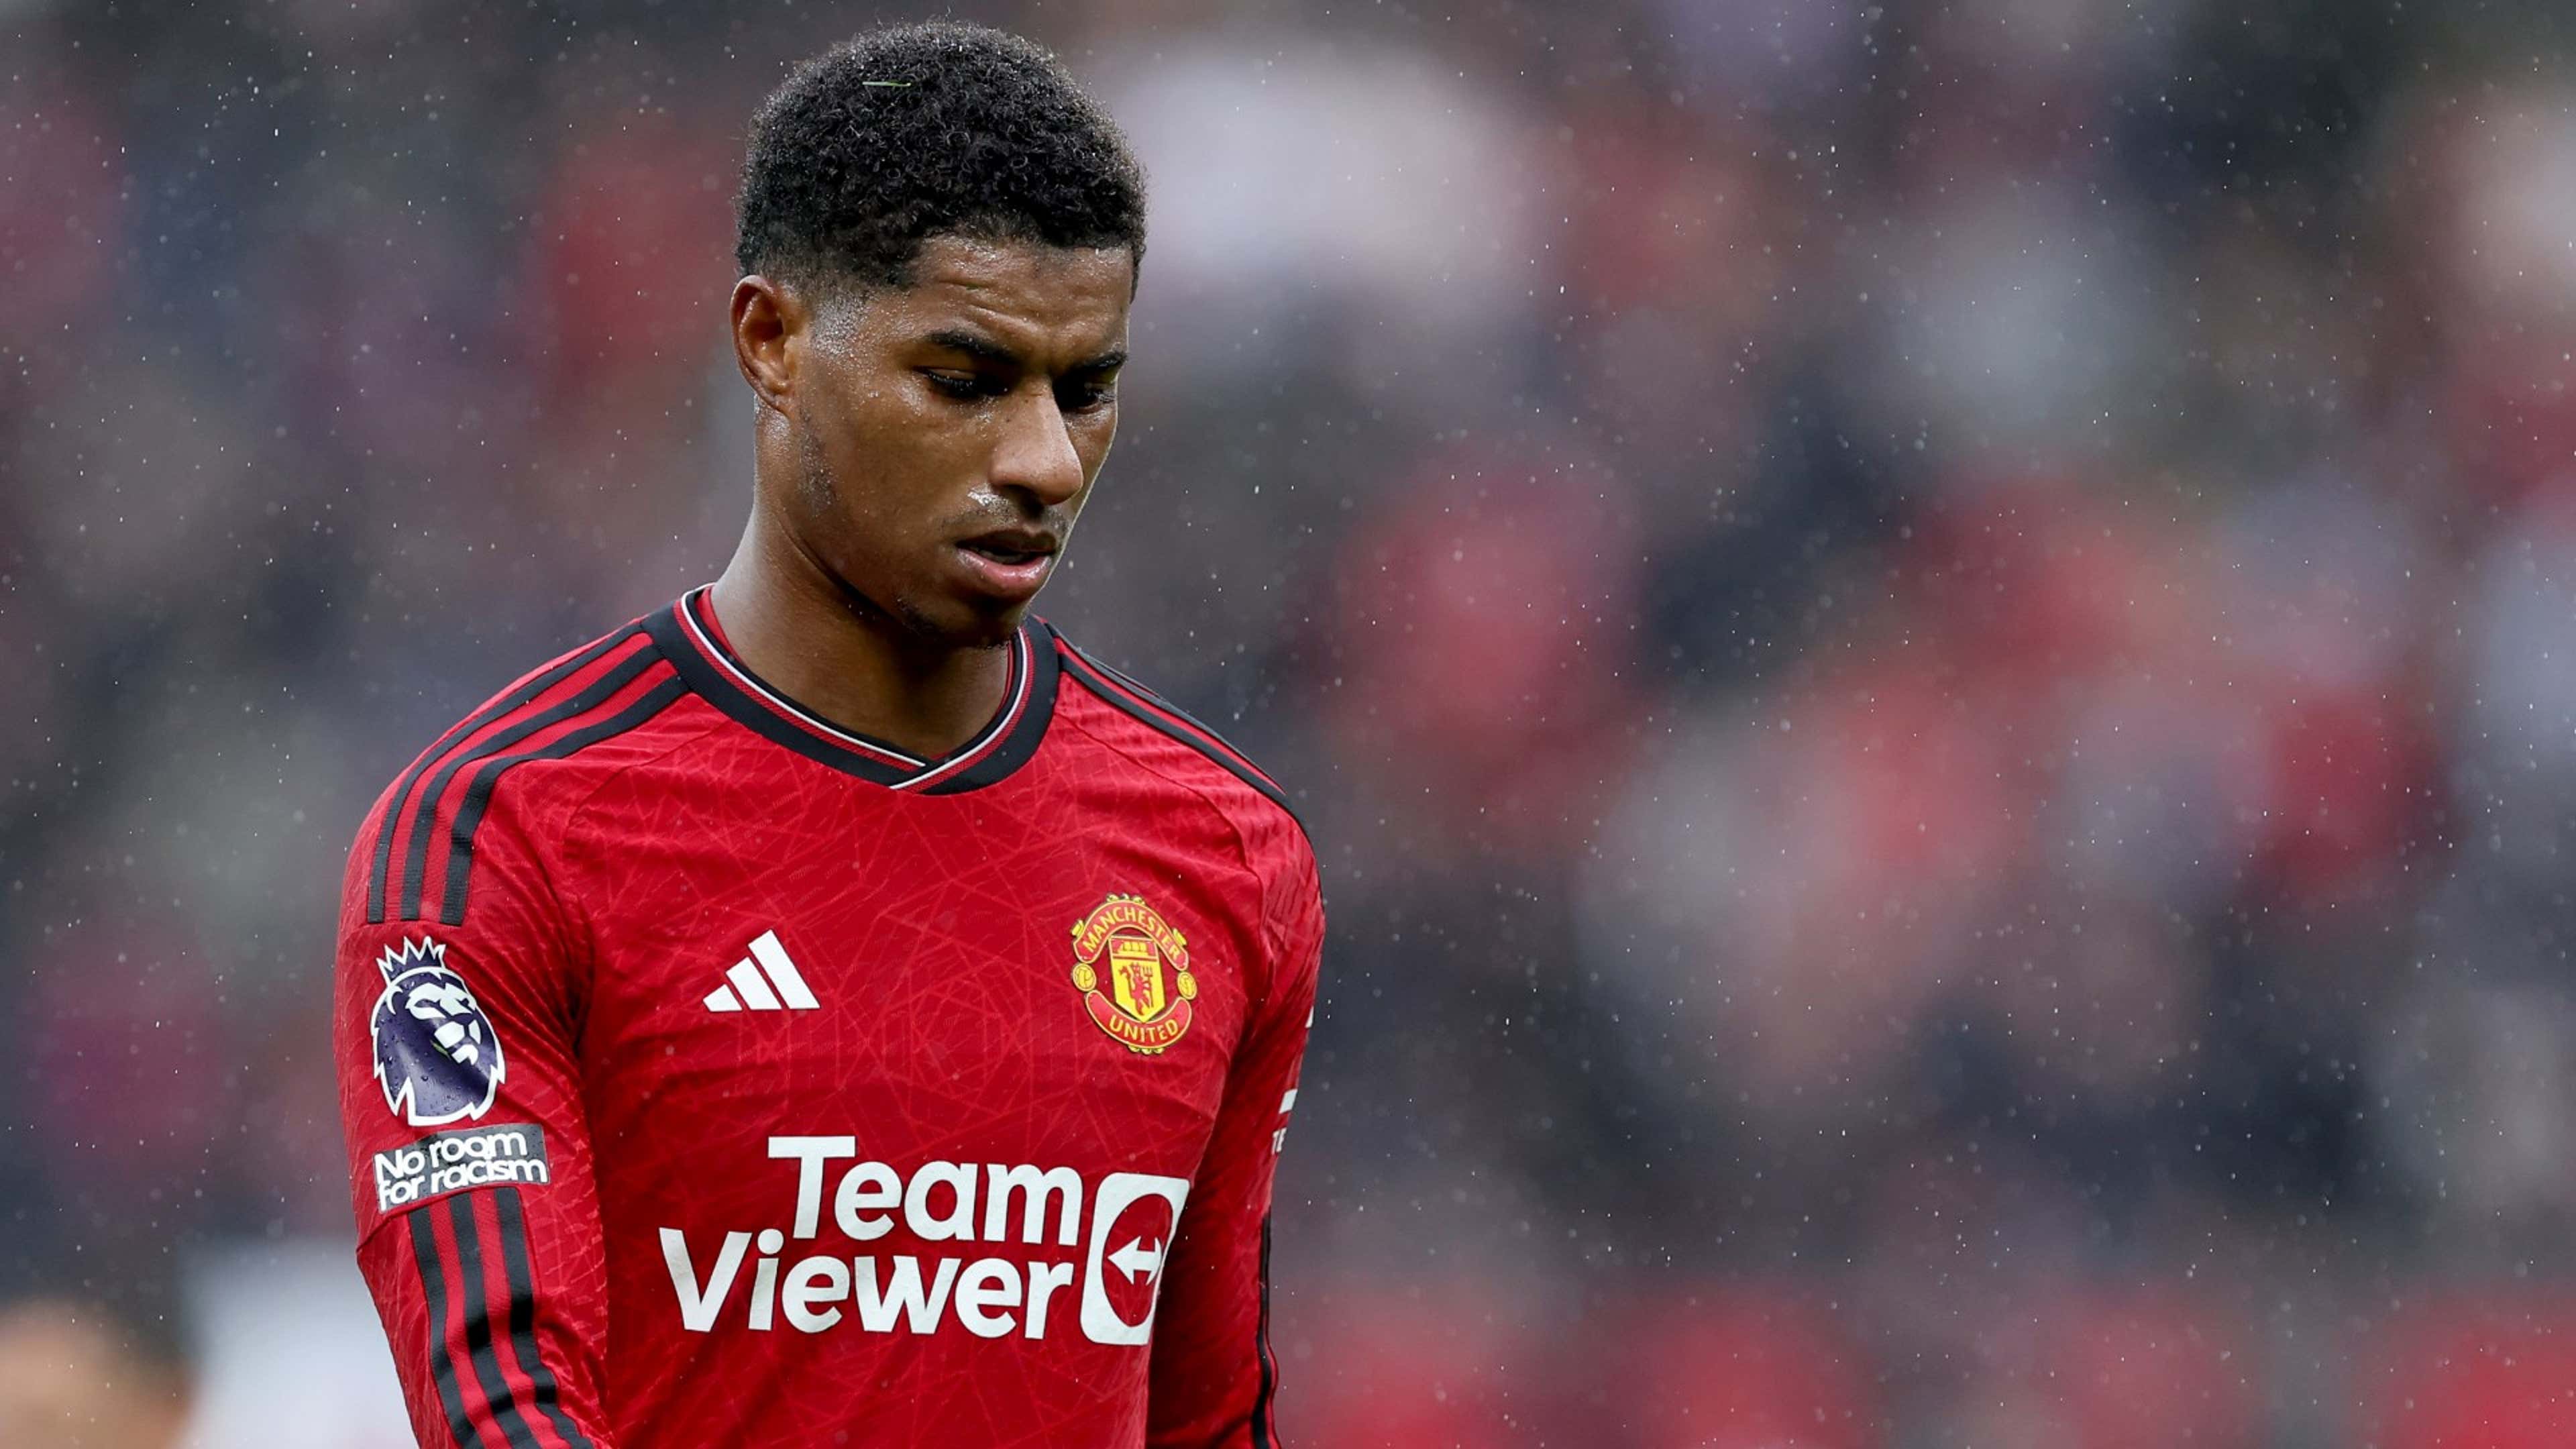 Erik ten Hag 'not happy' with Marcus Rashford's form at Manchester United